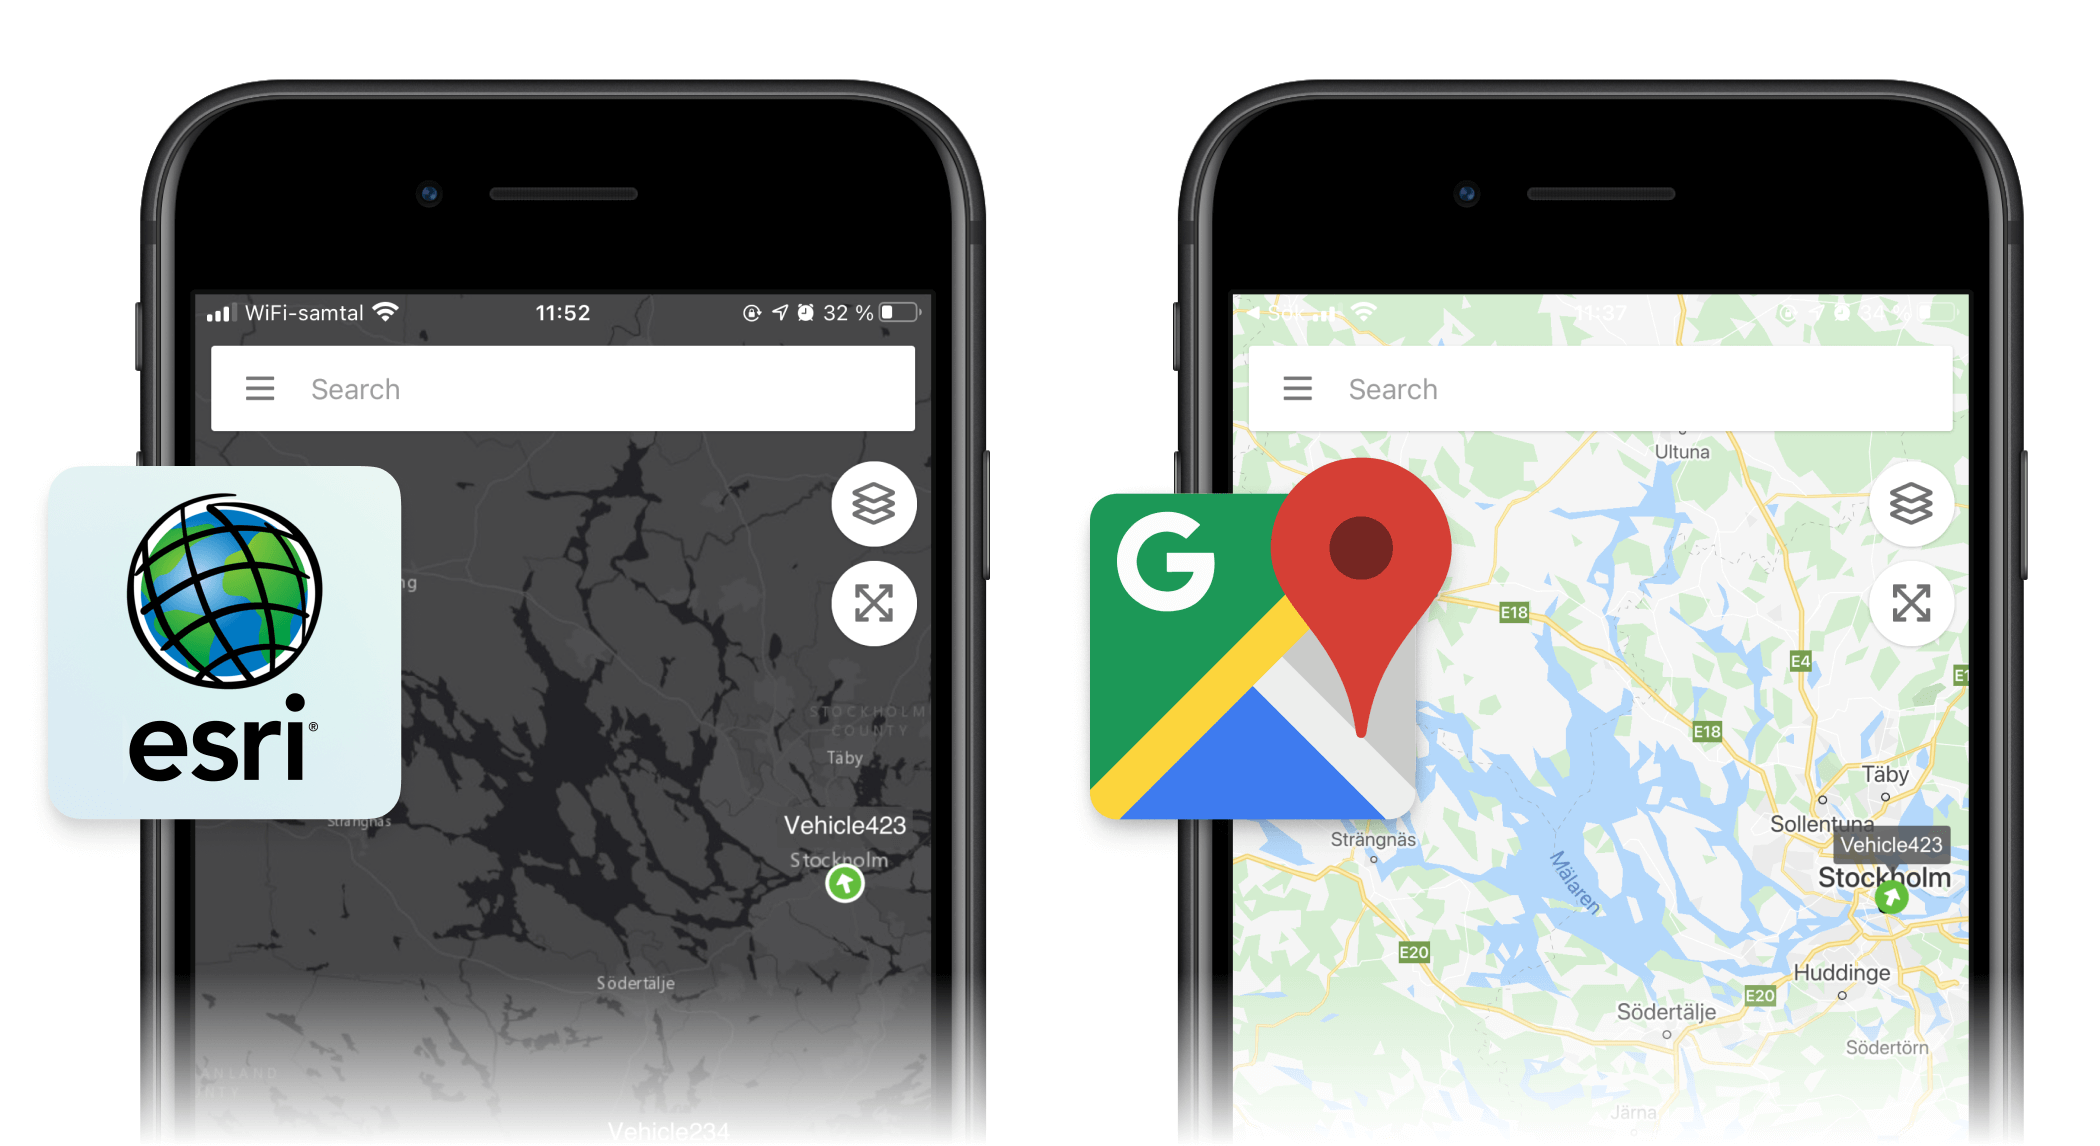 Two iPhone SE phones showing the GpsGate Fleet application using an ESRI map and Google Map respectively.
